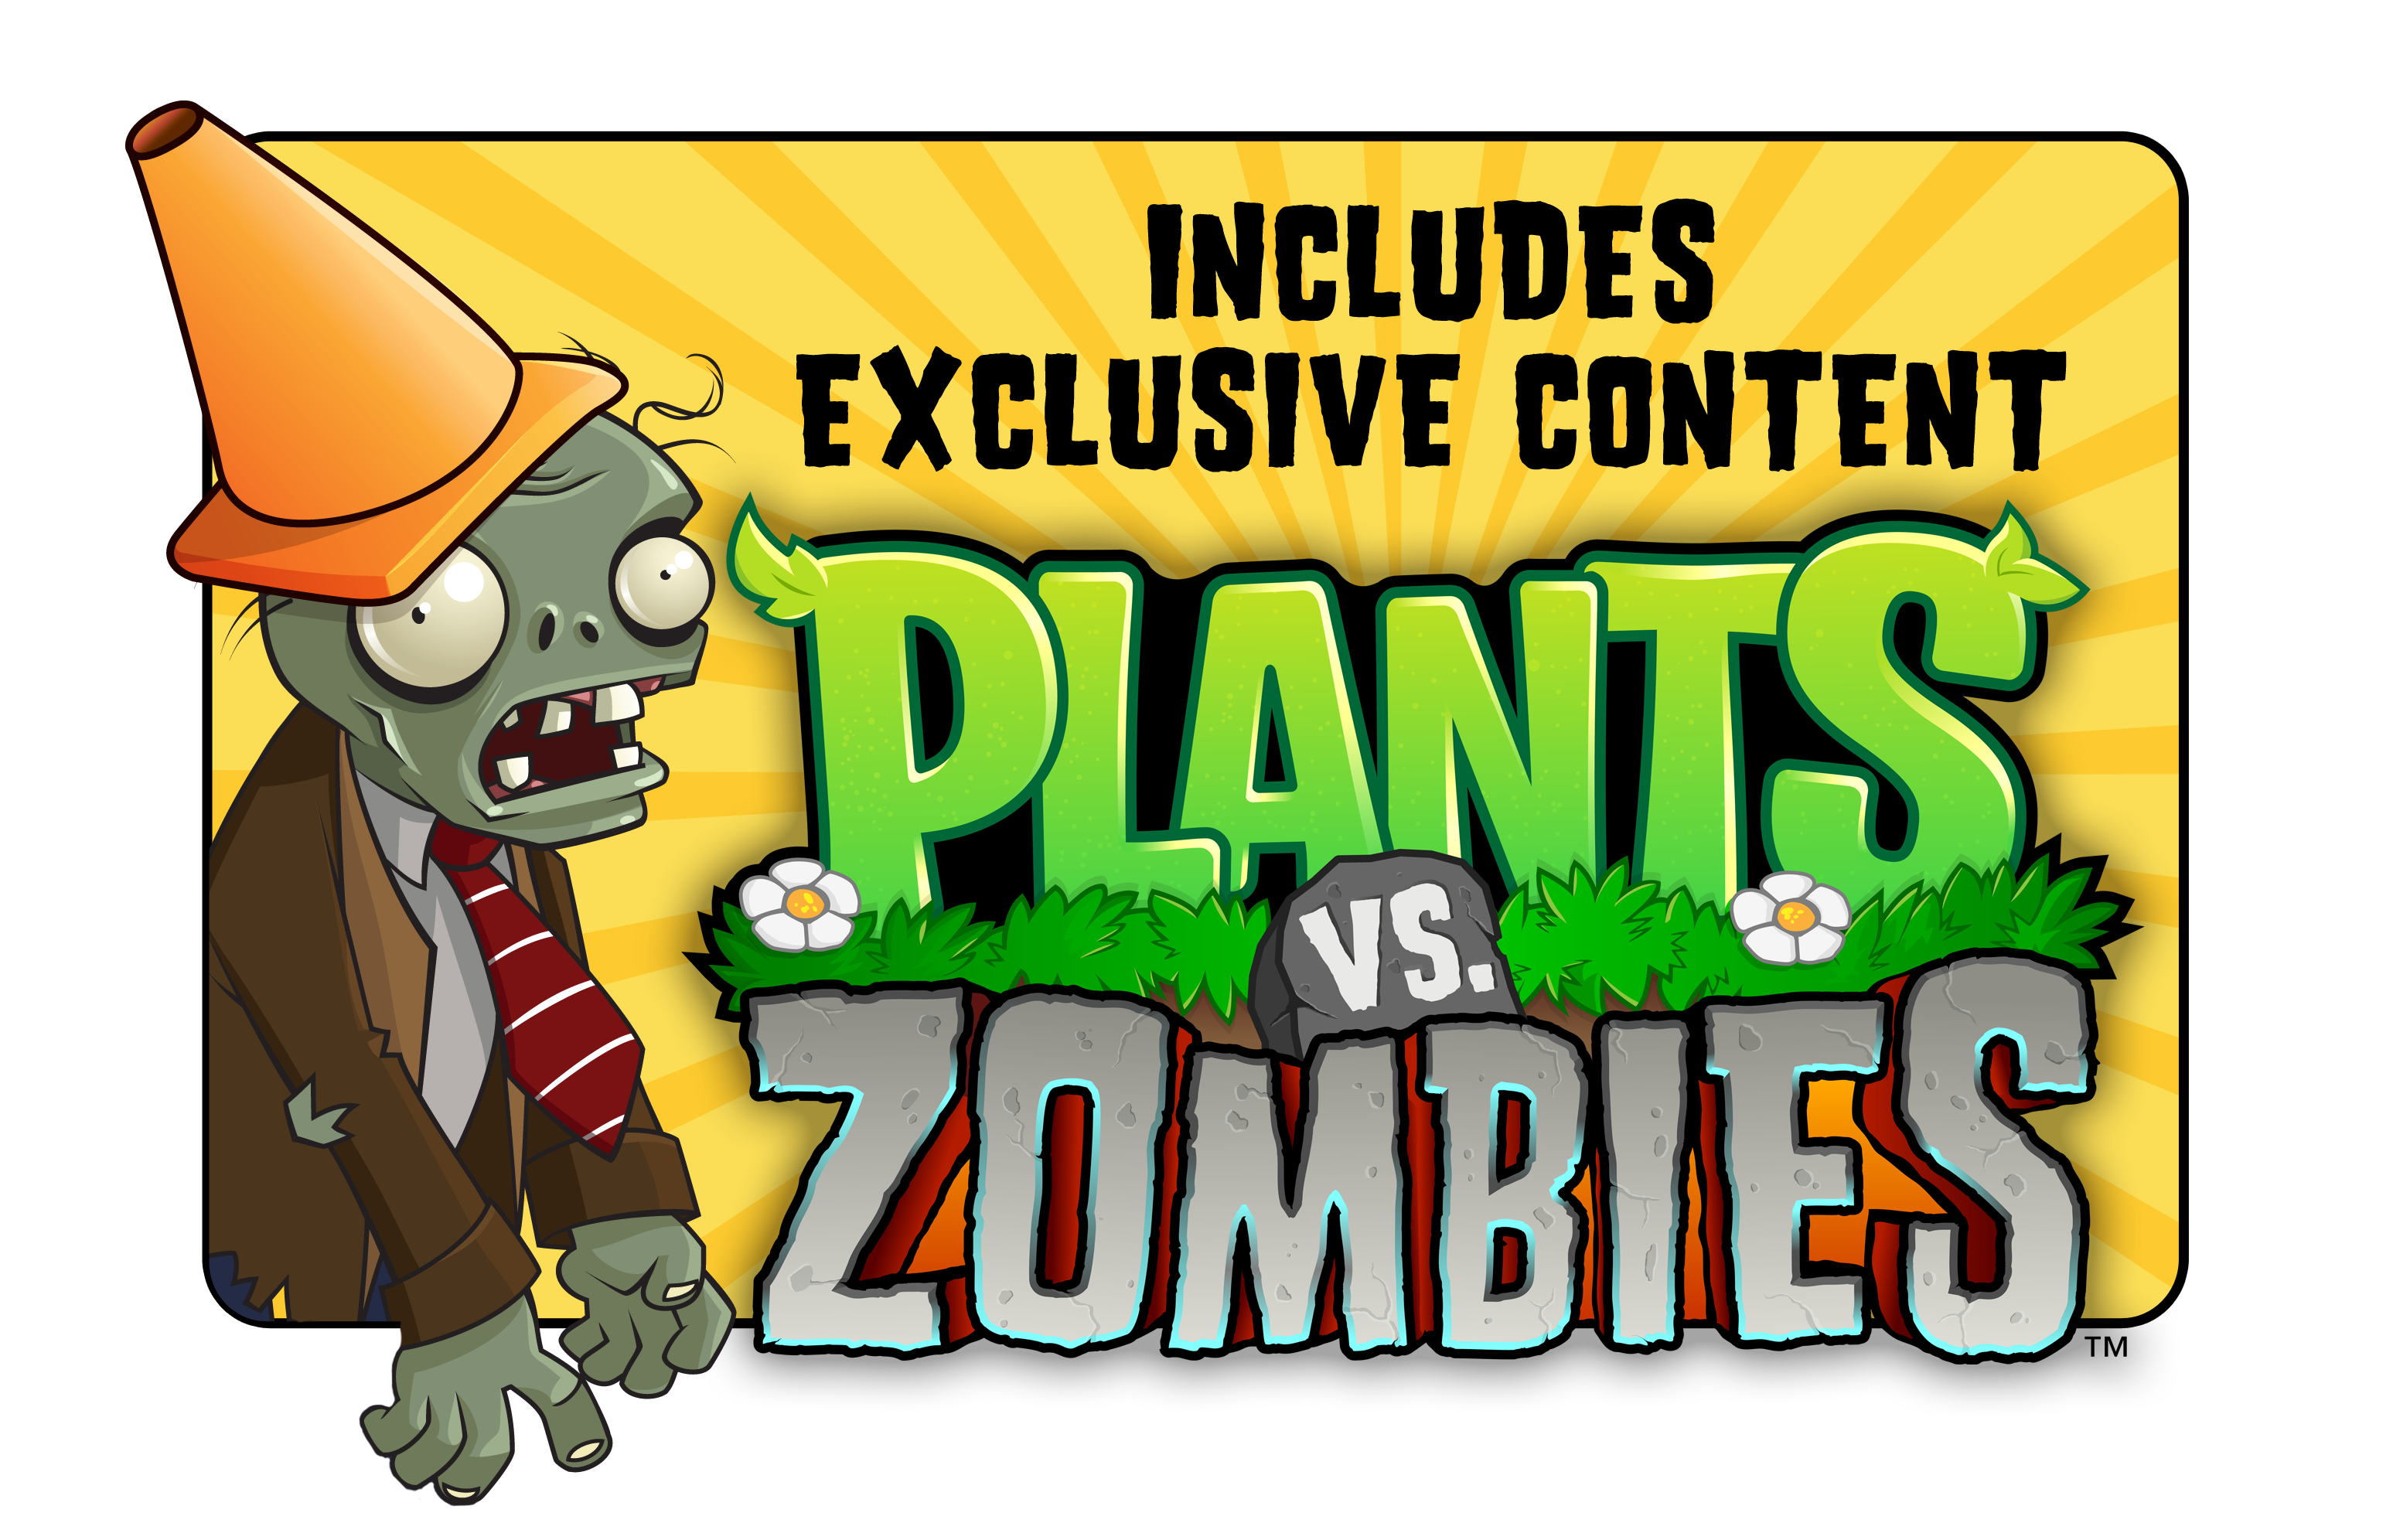 plants vs zombies nds